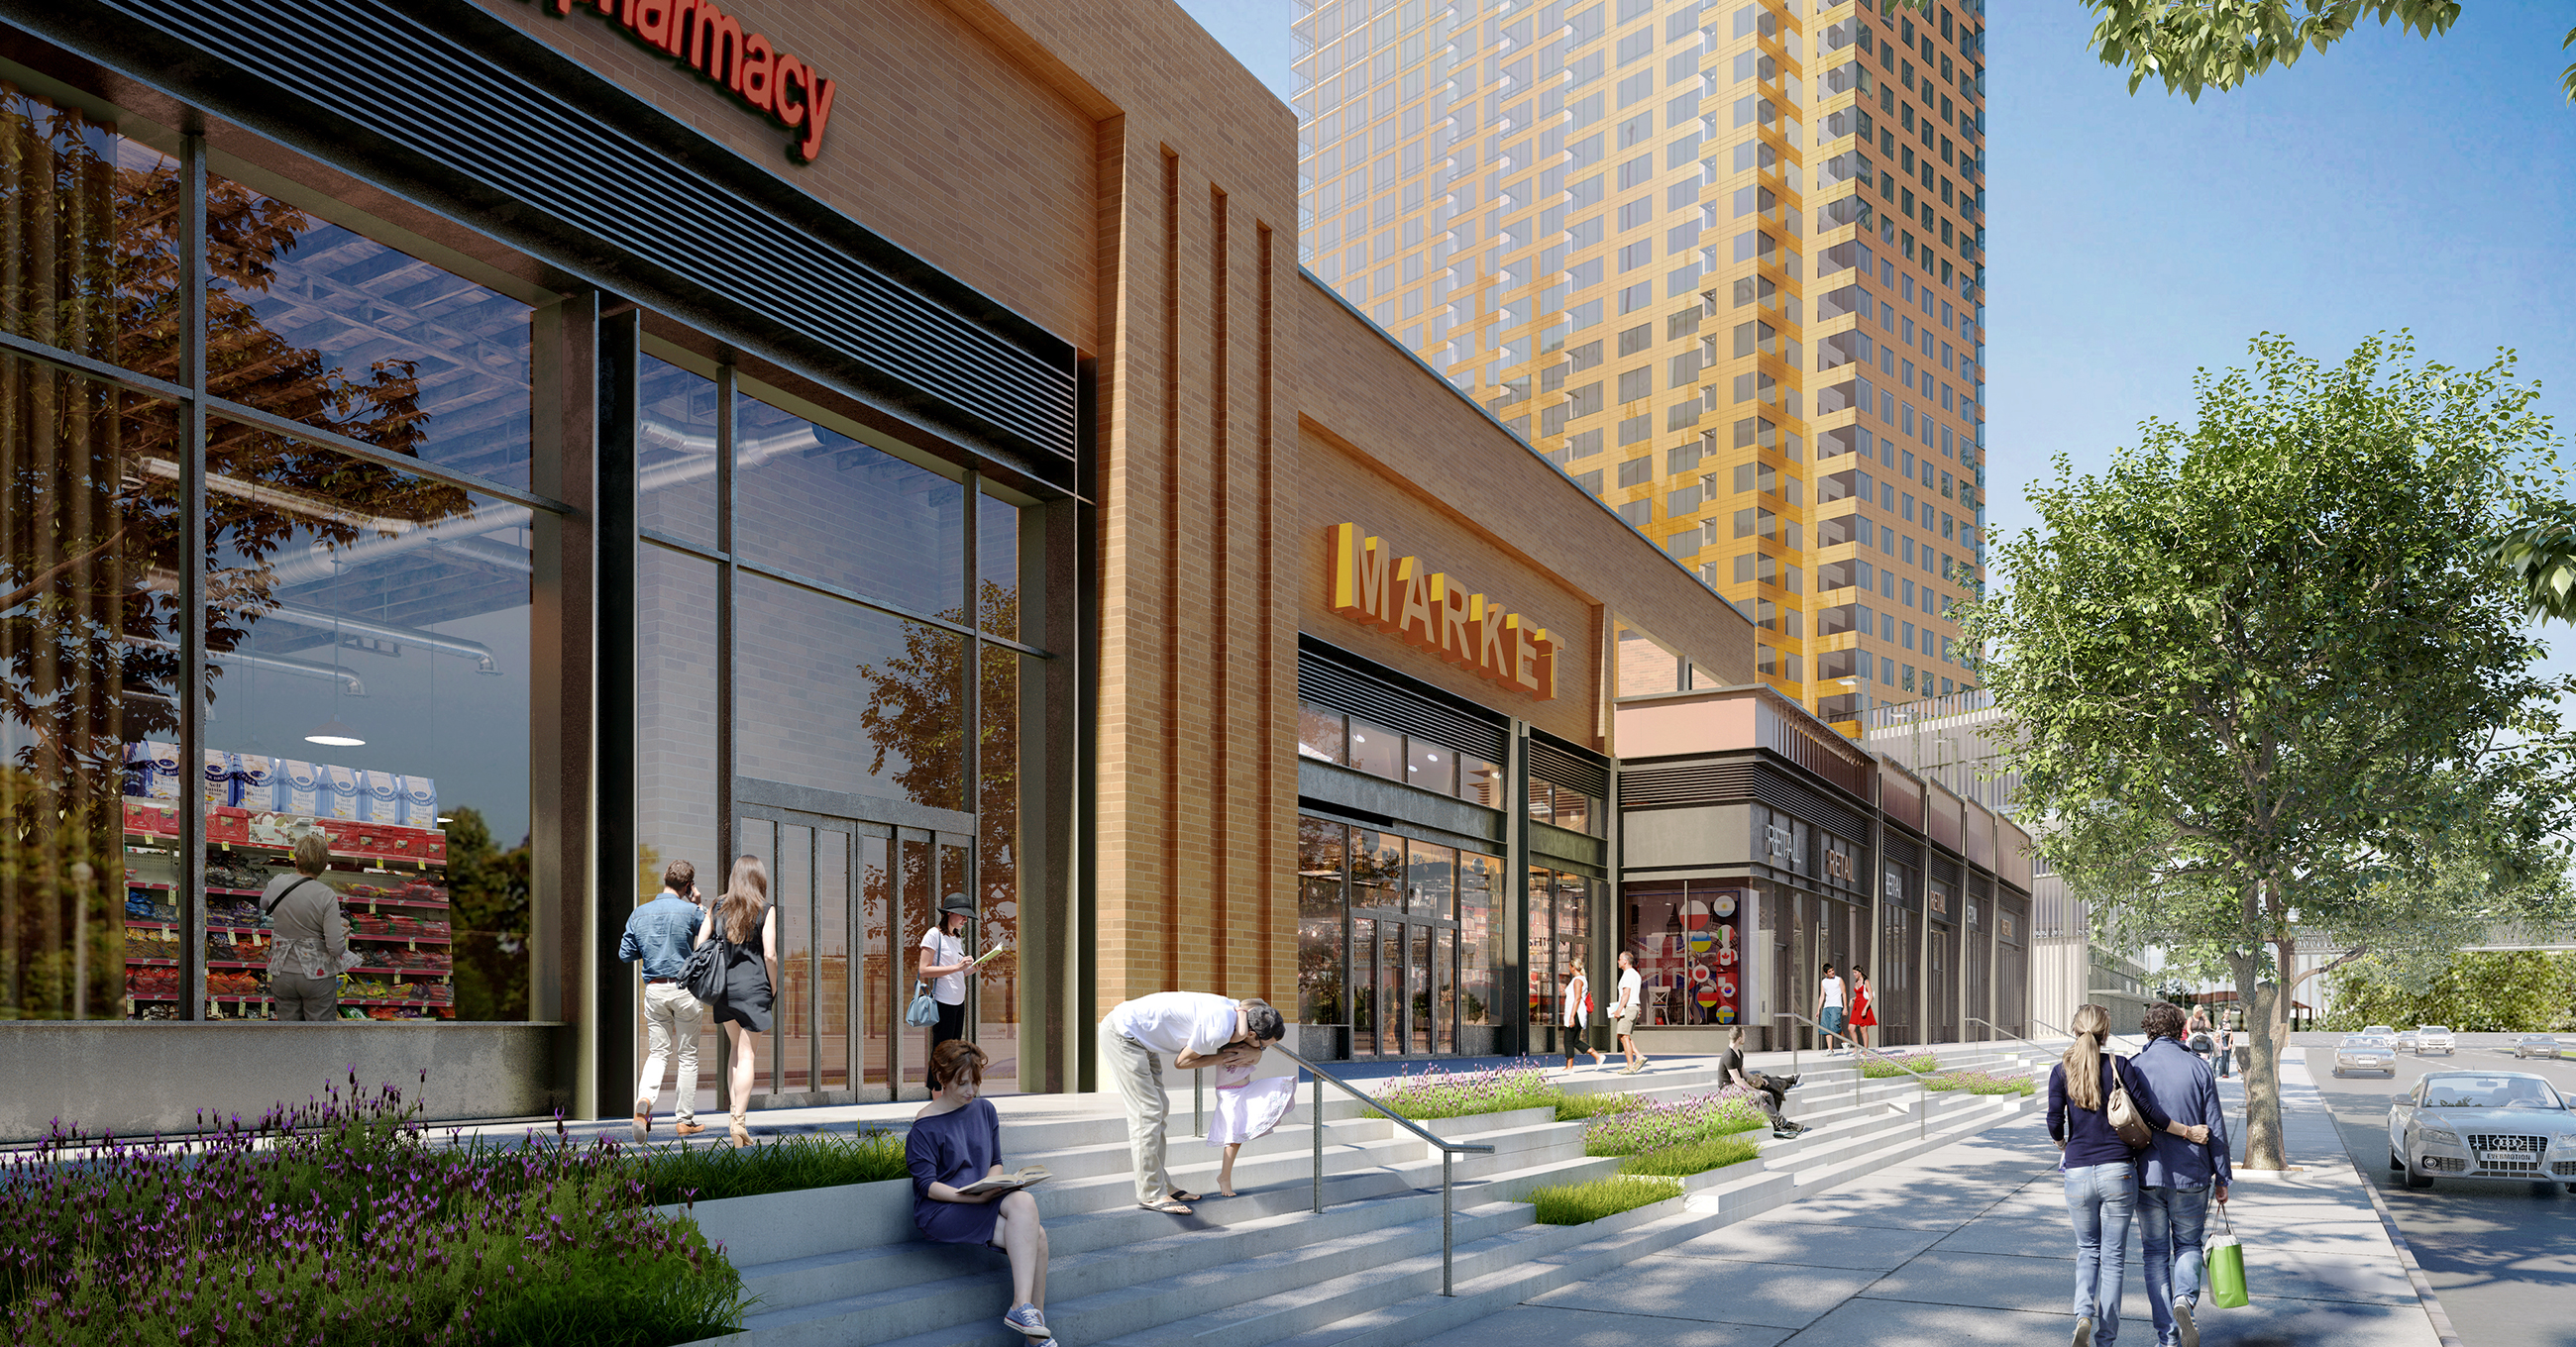 Retail for 532 Neptune Avenue. rendering by S9 Architecture